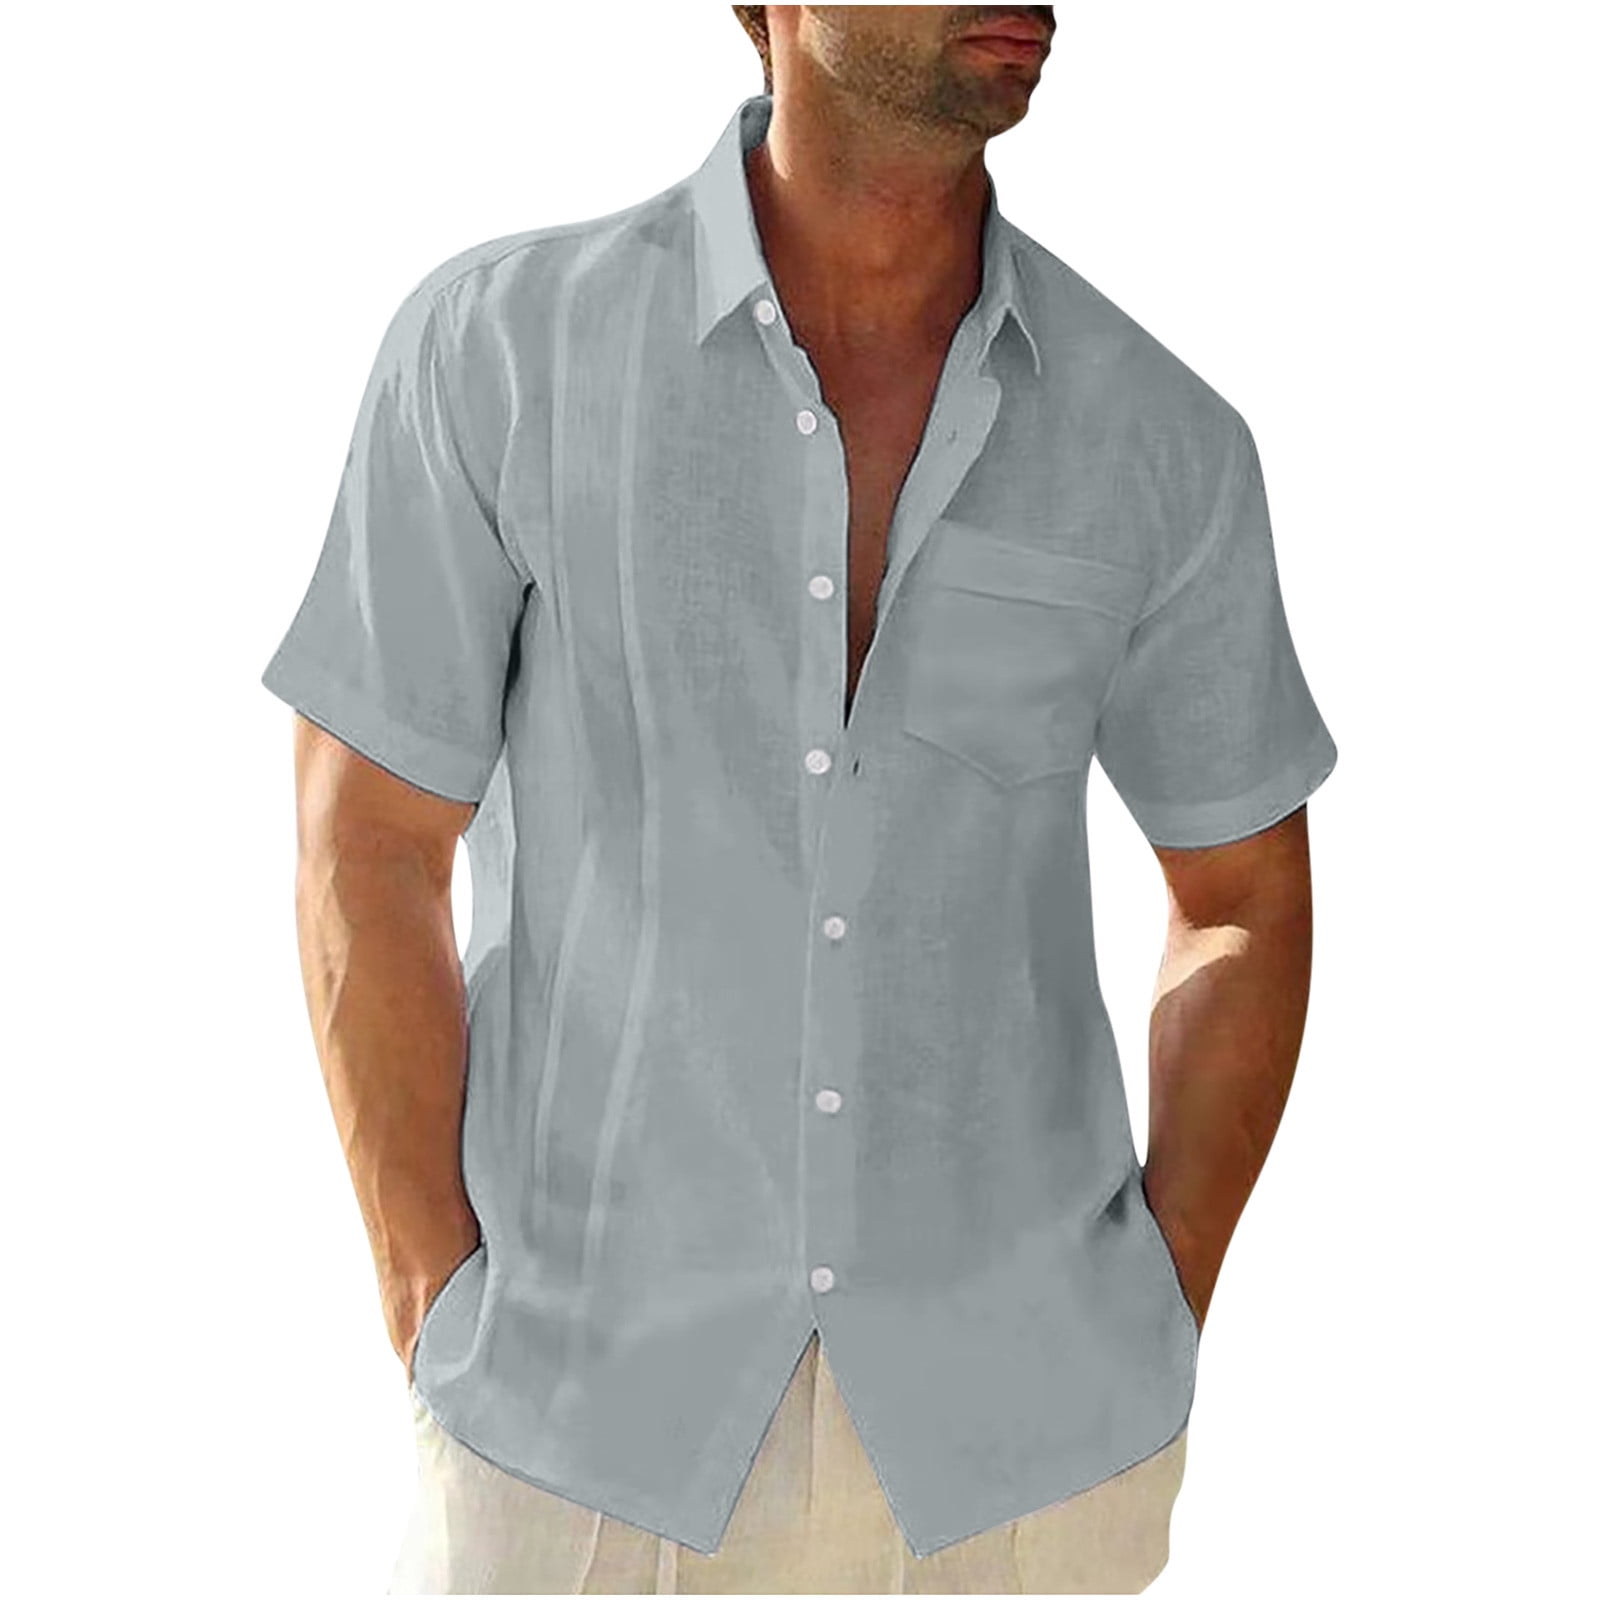 Oalirro Men's Casual Cotton Button Up Shirt Cleareance under $10 Pocket ...